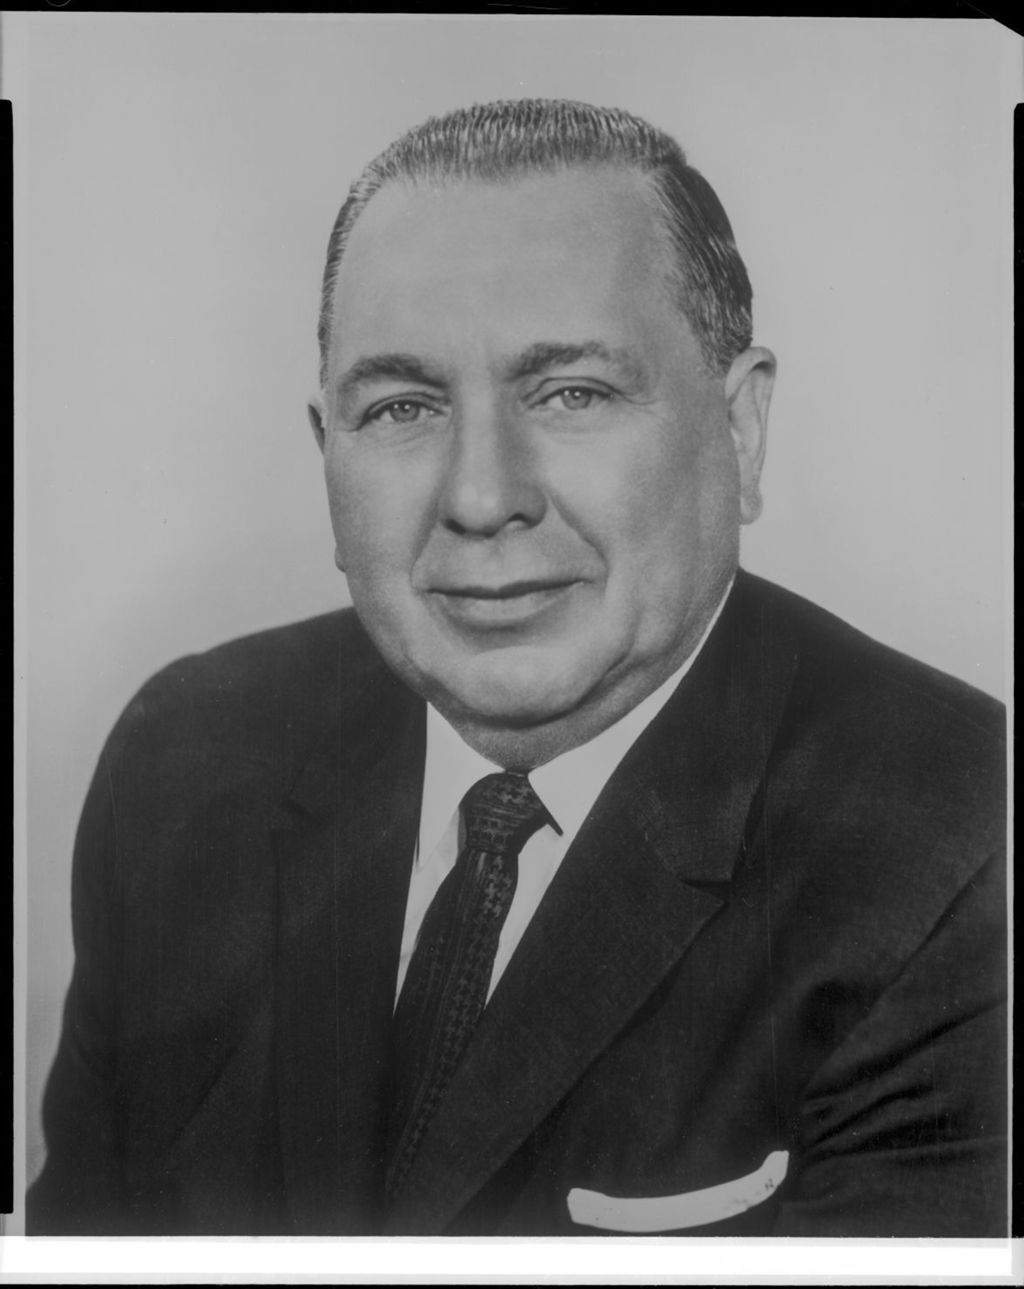 Miniature of Richard J. Daley in suit and tie